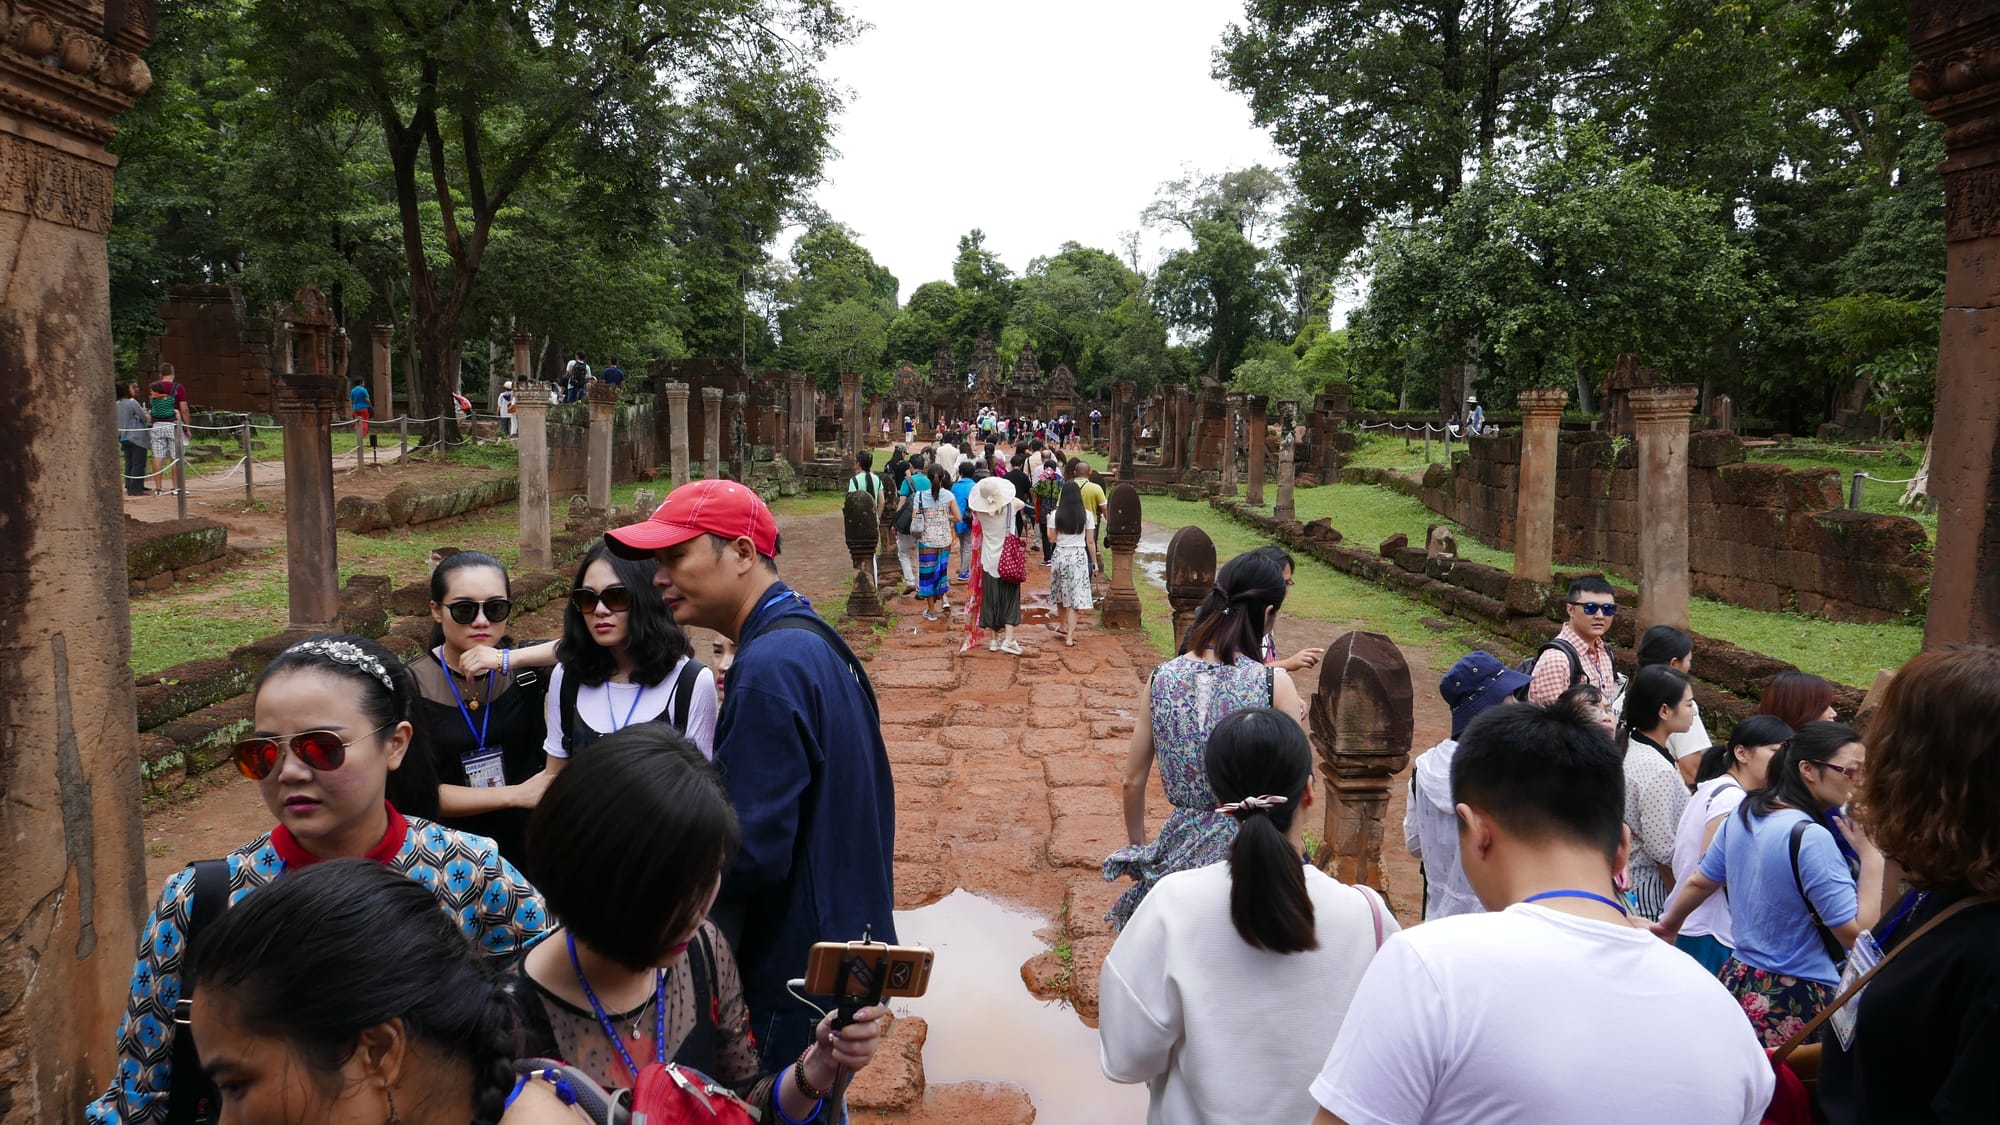 Photo by Author — the place was crowded — Banteay Srei Temple (ប្រាសាទបន្ទាយស្រី), Angkor Archaeological Park, Angkor, Cambodia